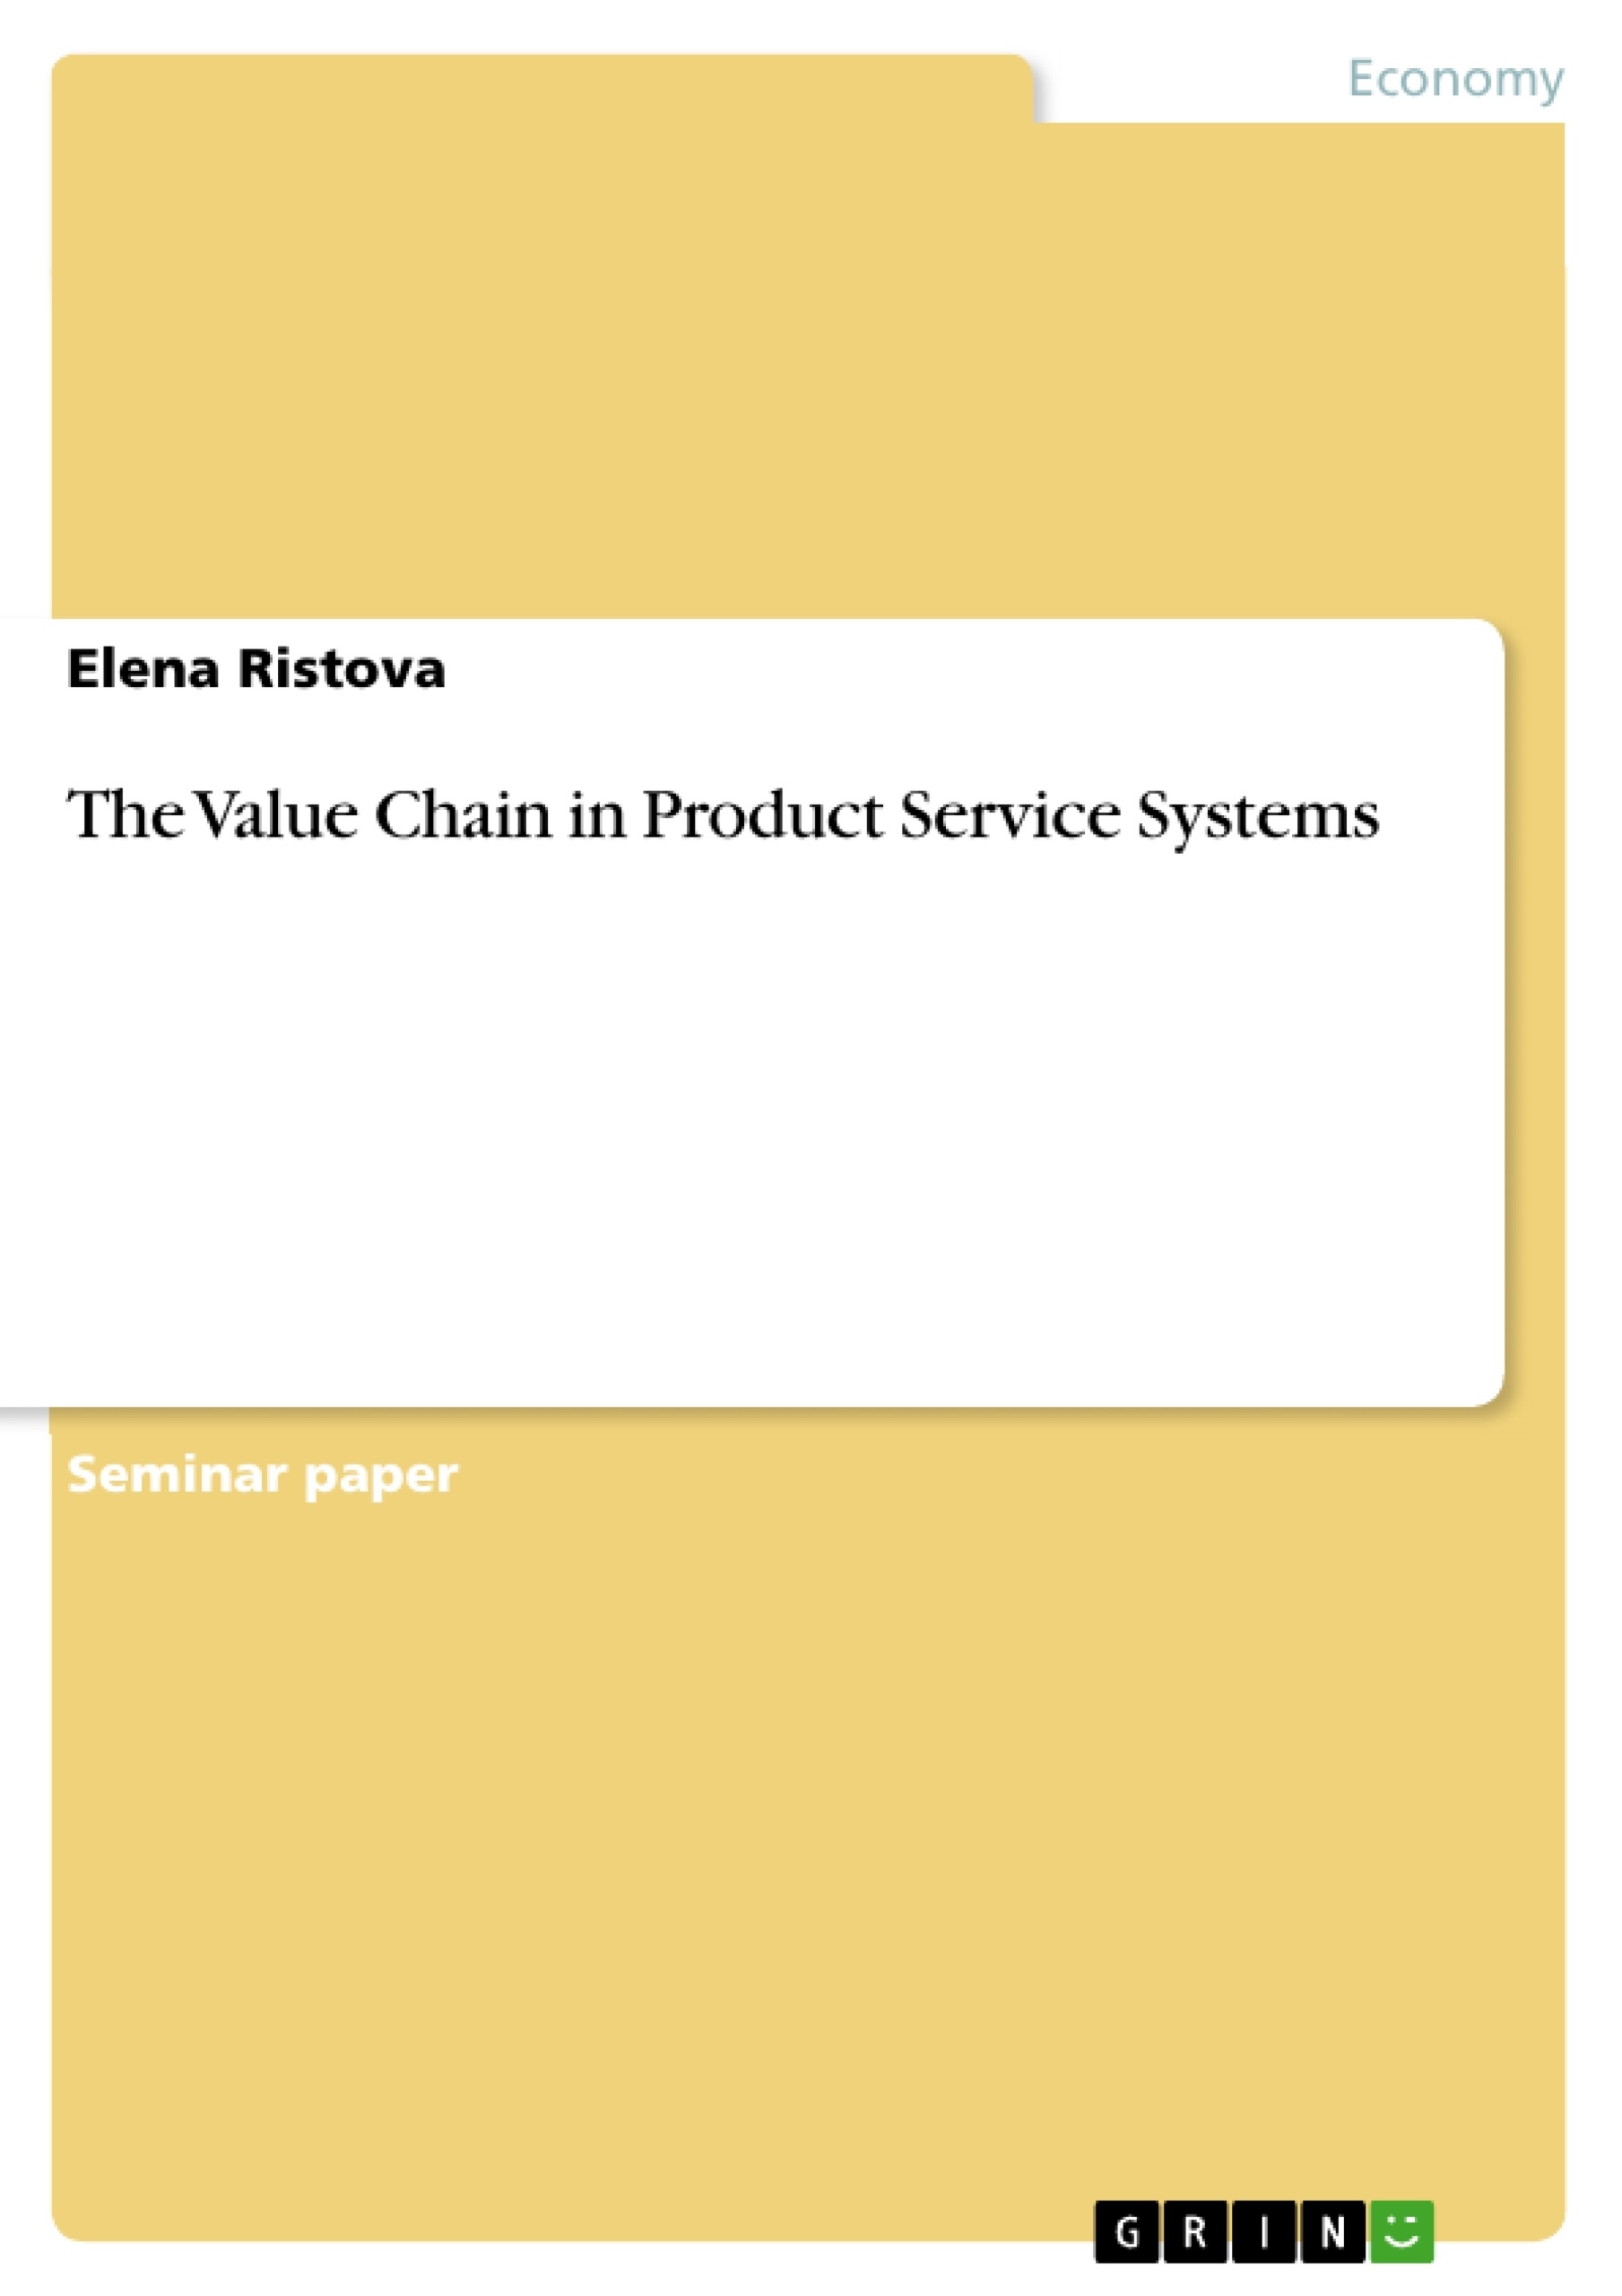 Title: The Value Chain in Product Service Systems